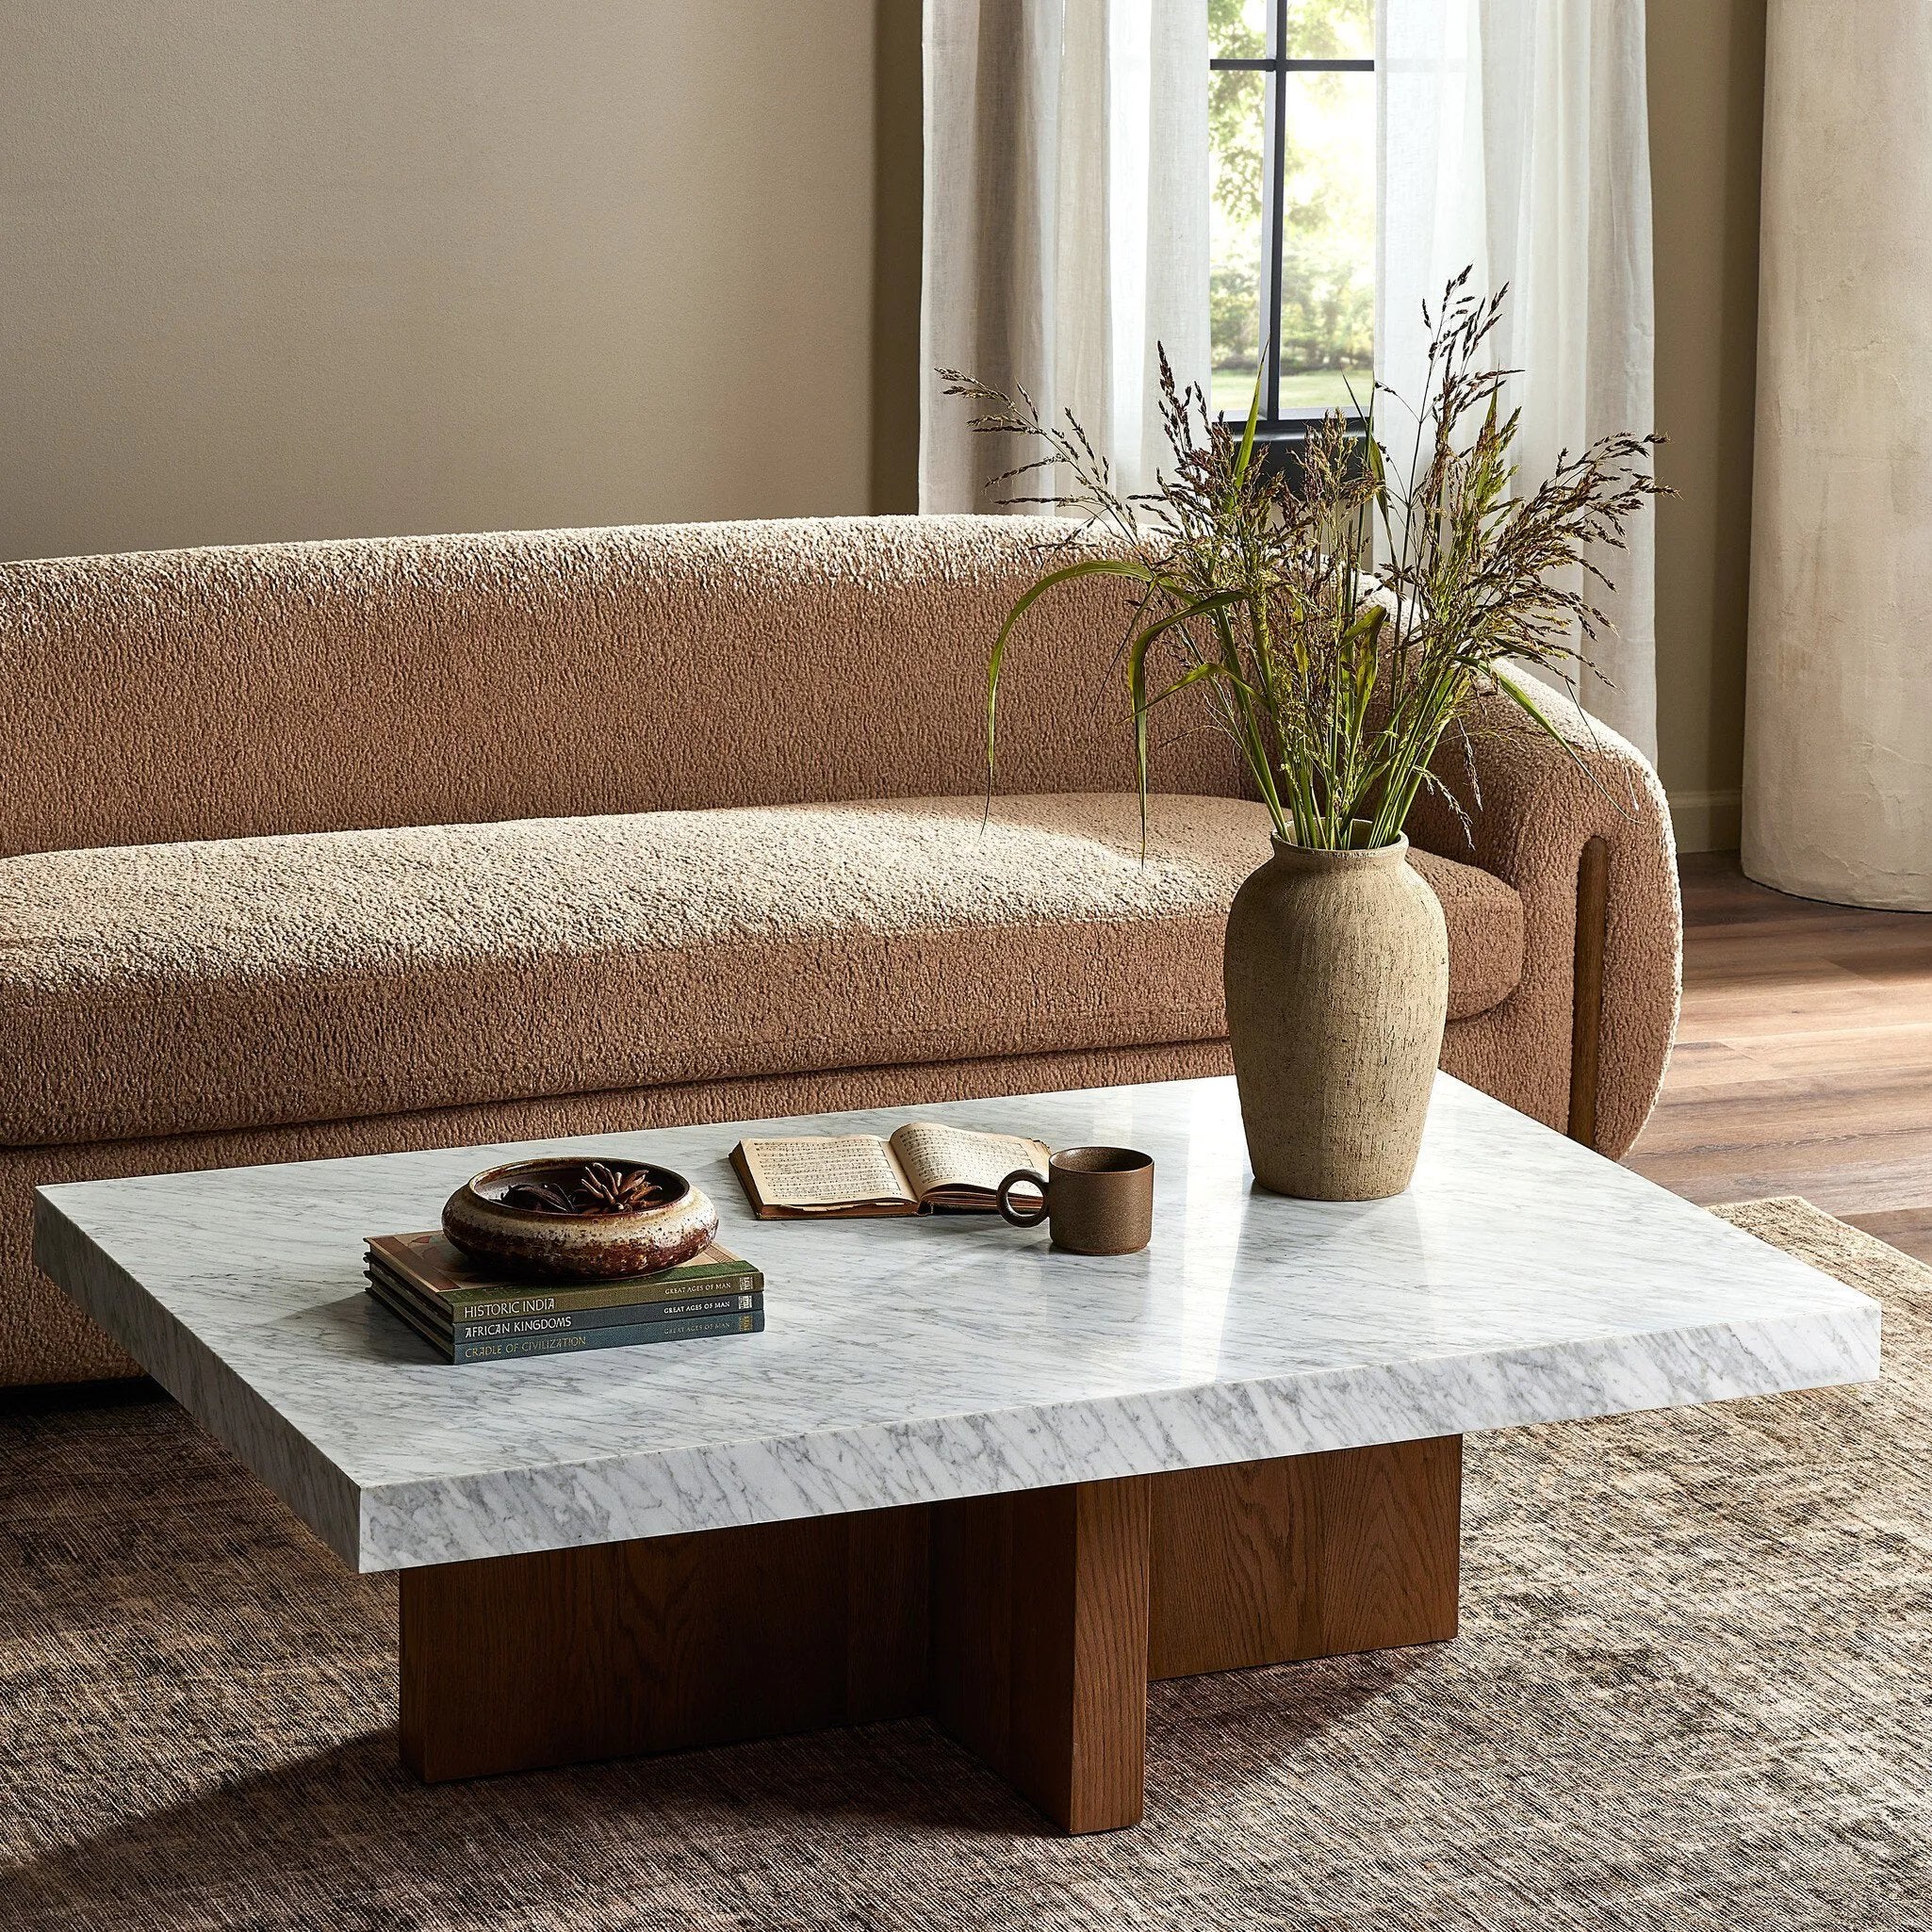 Structured lines and wide proportions fuse for a mixed material coffee table of smoked oak and polished marble.Collection: Hughe Amethyst Home provides interior design, new home construction design consulting, vintage area rugs, and lighting in the Salt Lake City metro area.